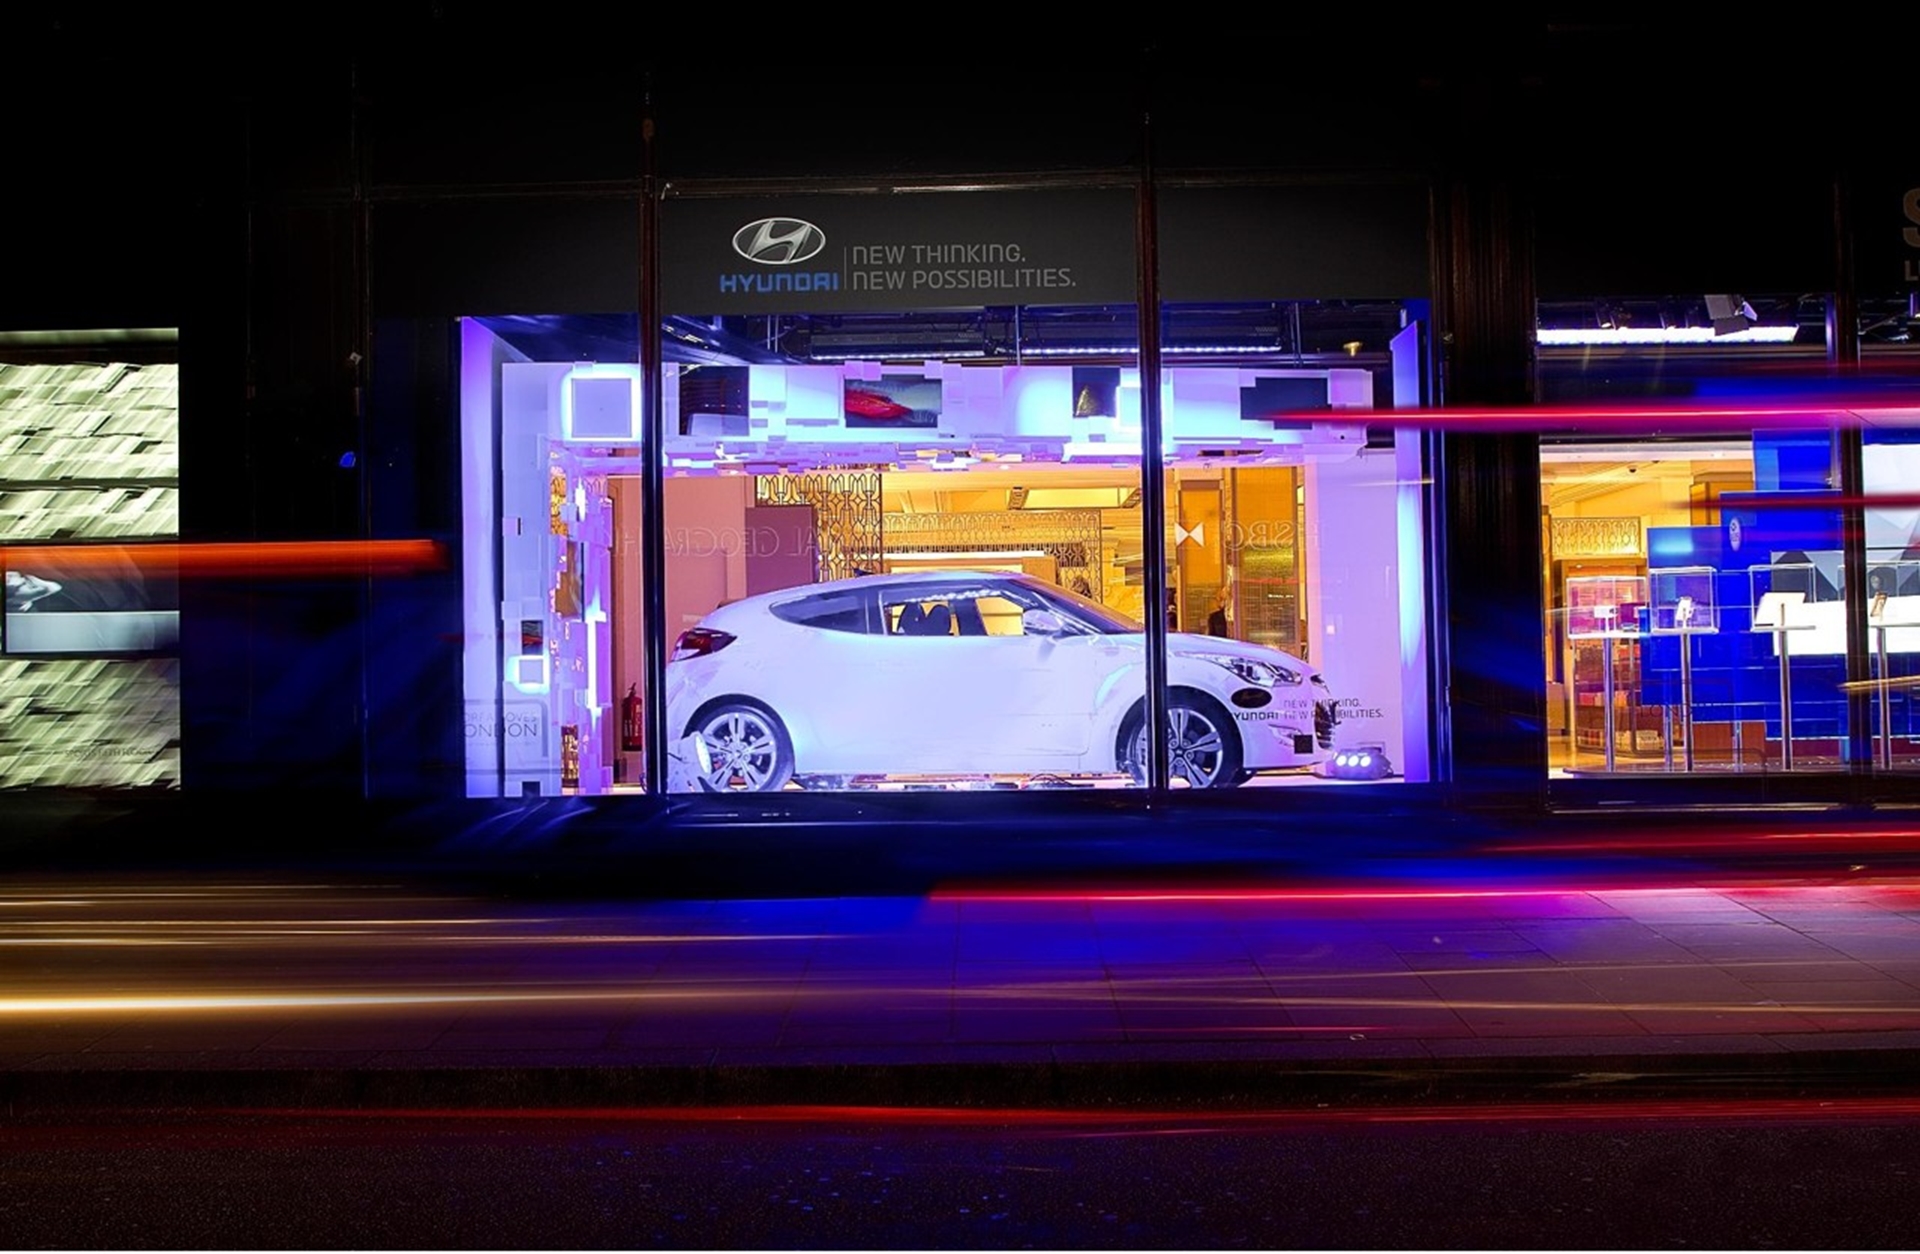 HYUNDAI SWITCHES WINDOW SHOPPING AT HARRODS UP A GEAR